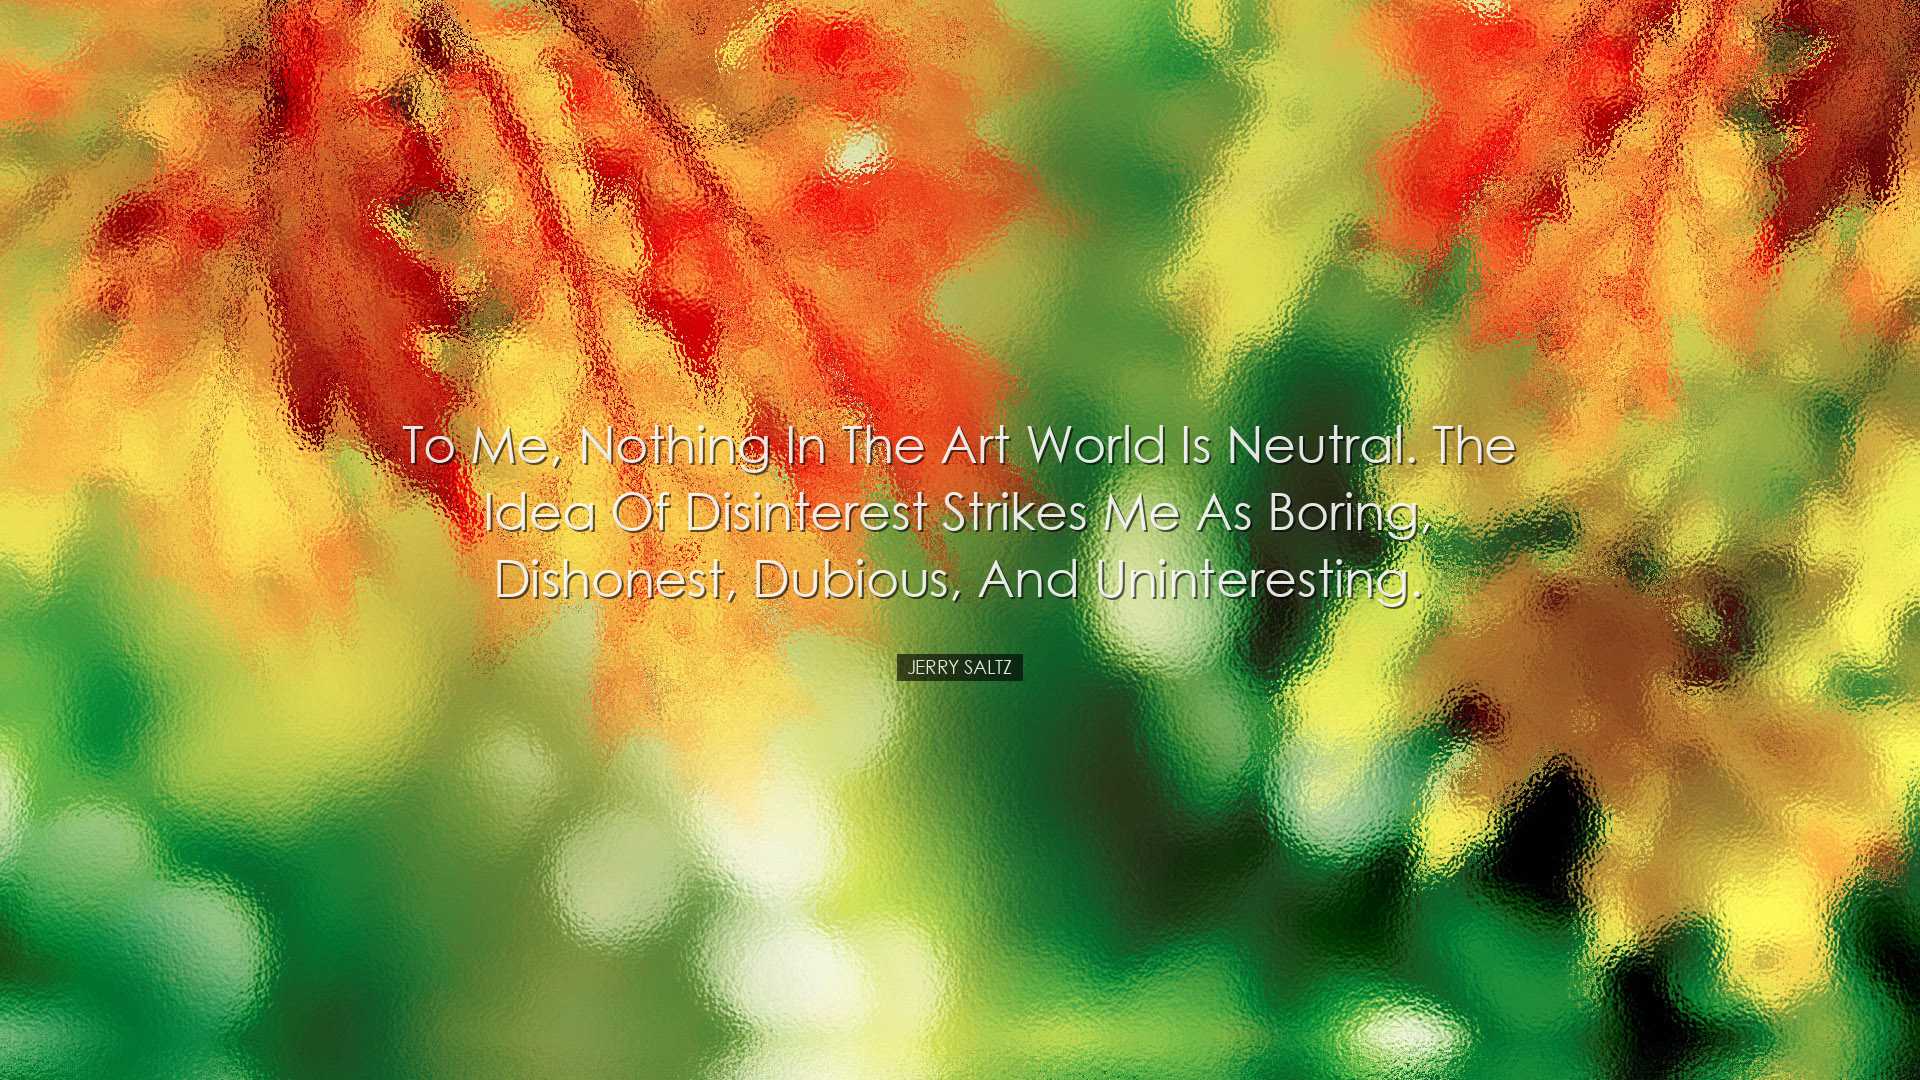 To me, nothing in the art world is neutral. The idea of disinteres